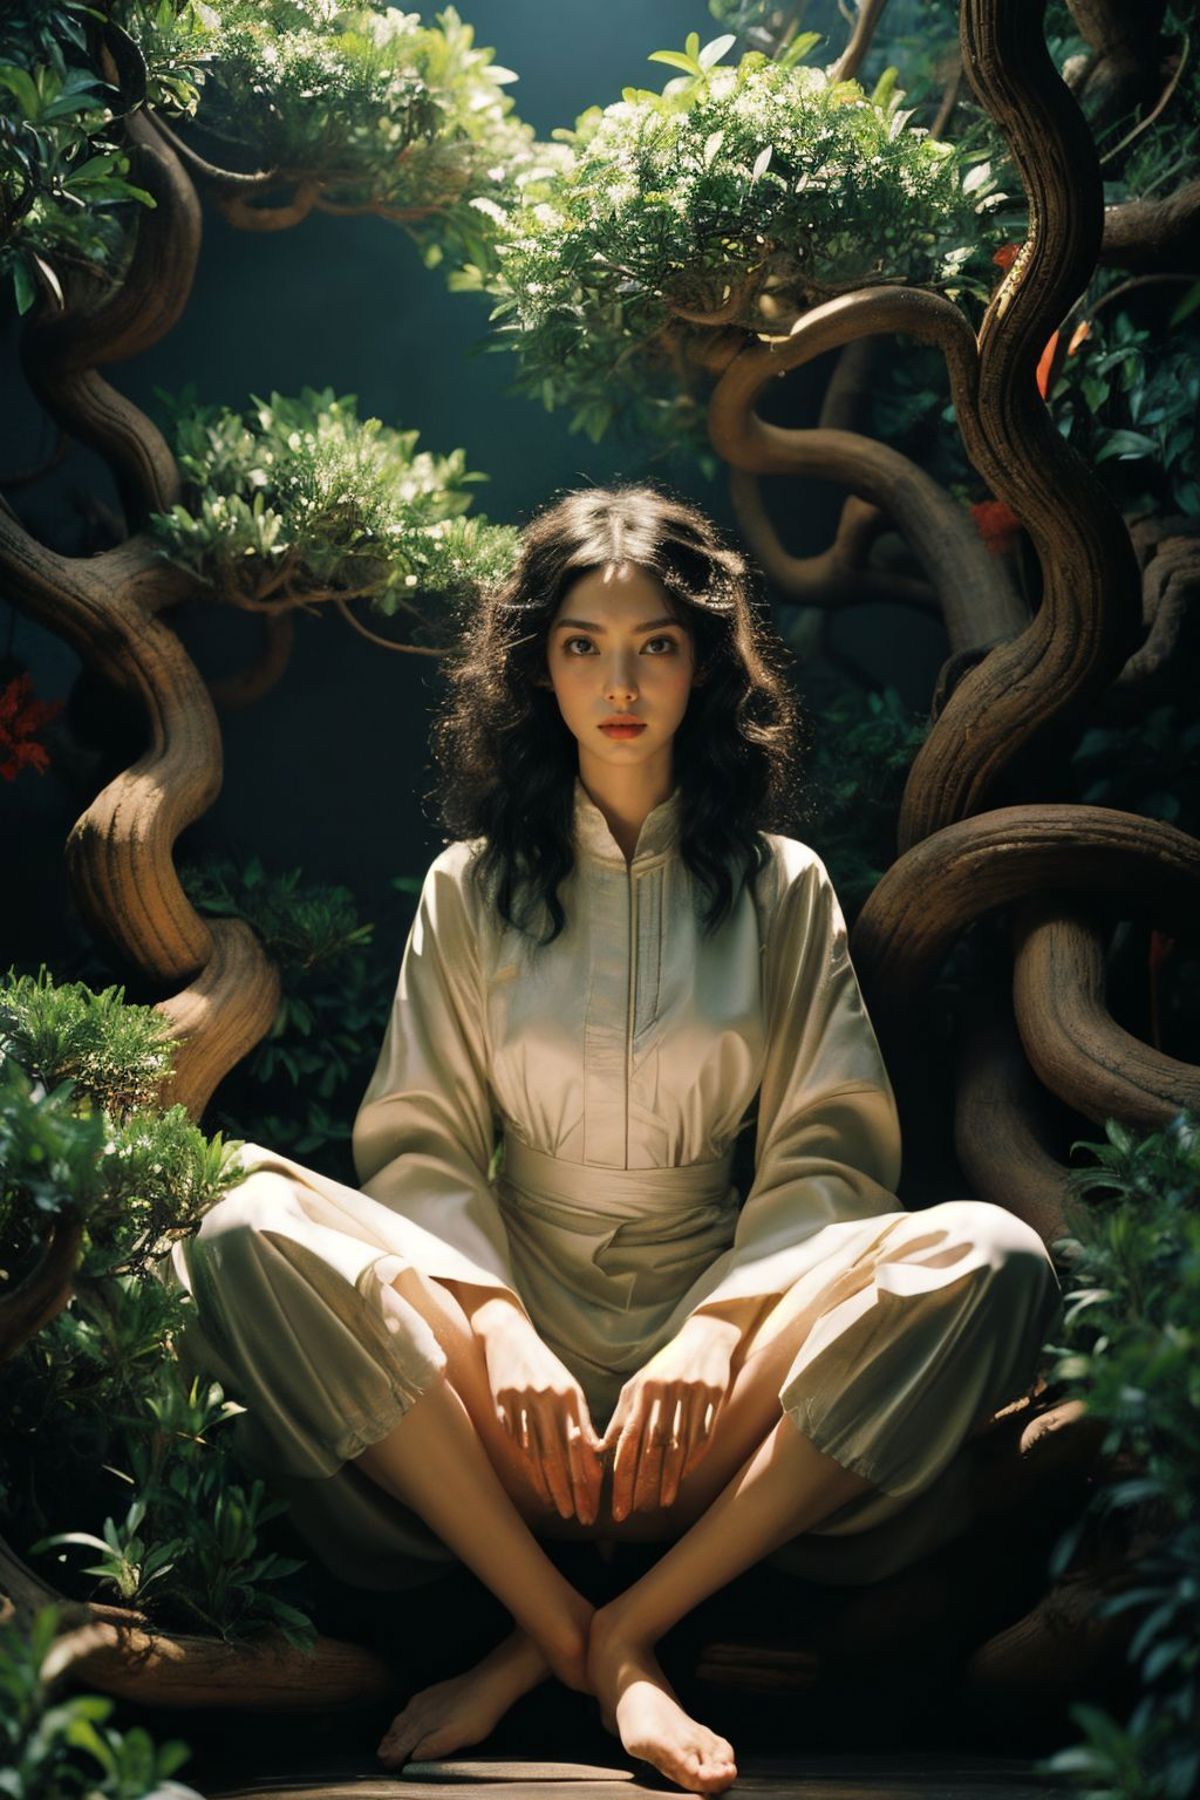 A woman in a long, flowing robe sits among twisted tree roots.